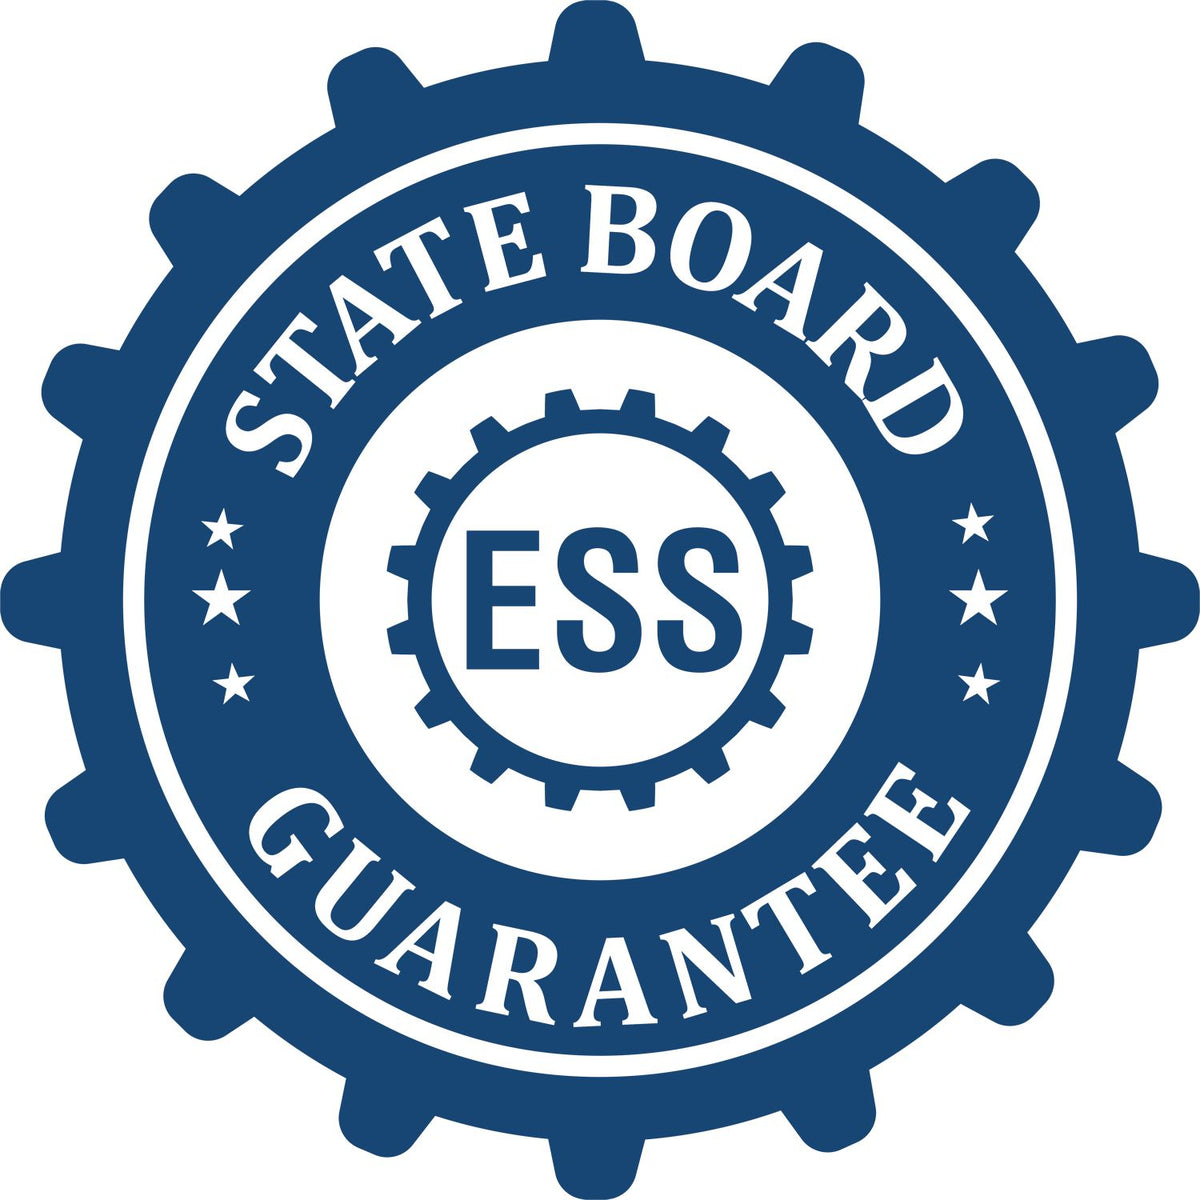 An emblem in a gear shape illustrating a state board guarantee for the Hybrid Florida Geologist Seal